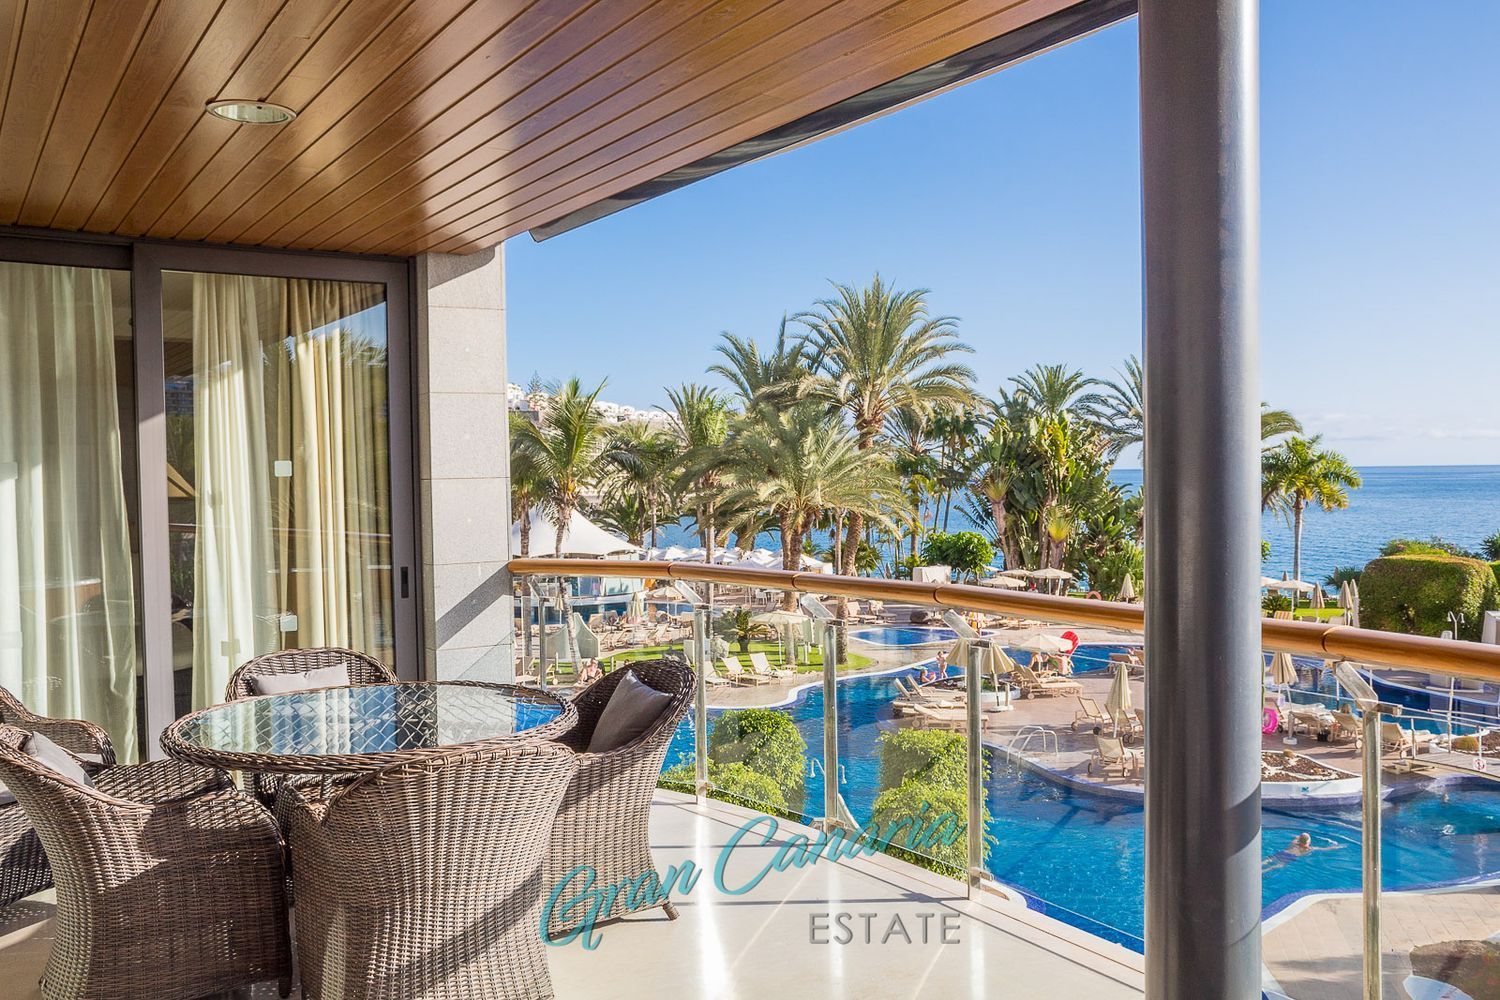 Flat for sale in first sea line in Los Canarios, Mogán